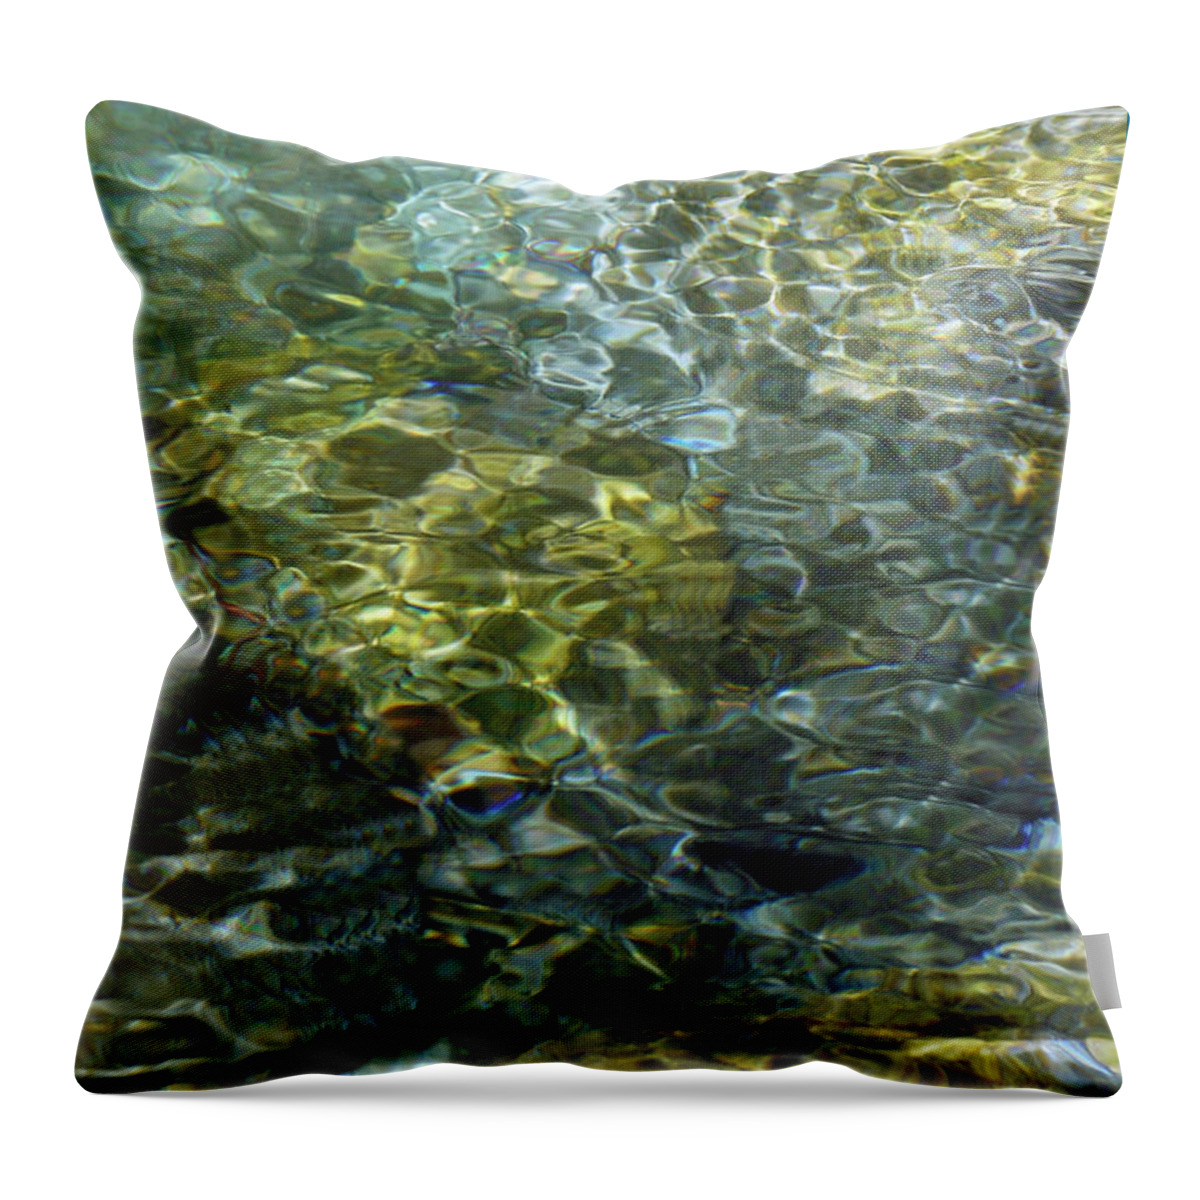 Abstract Photography Throw Pillow featuring the photograph Creek Bed Jewel 8 by Deborah Ann Good